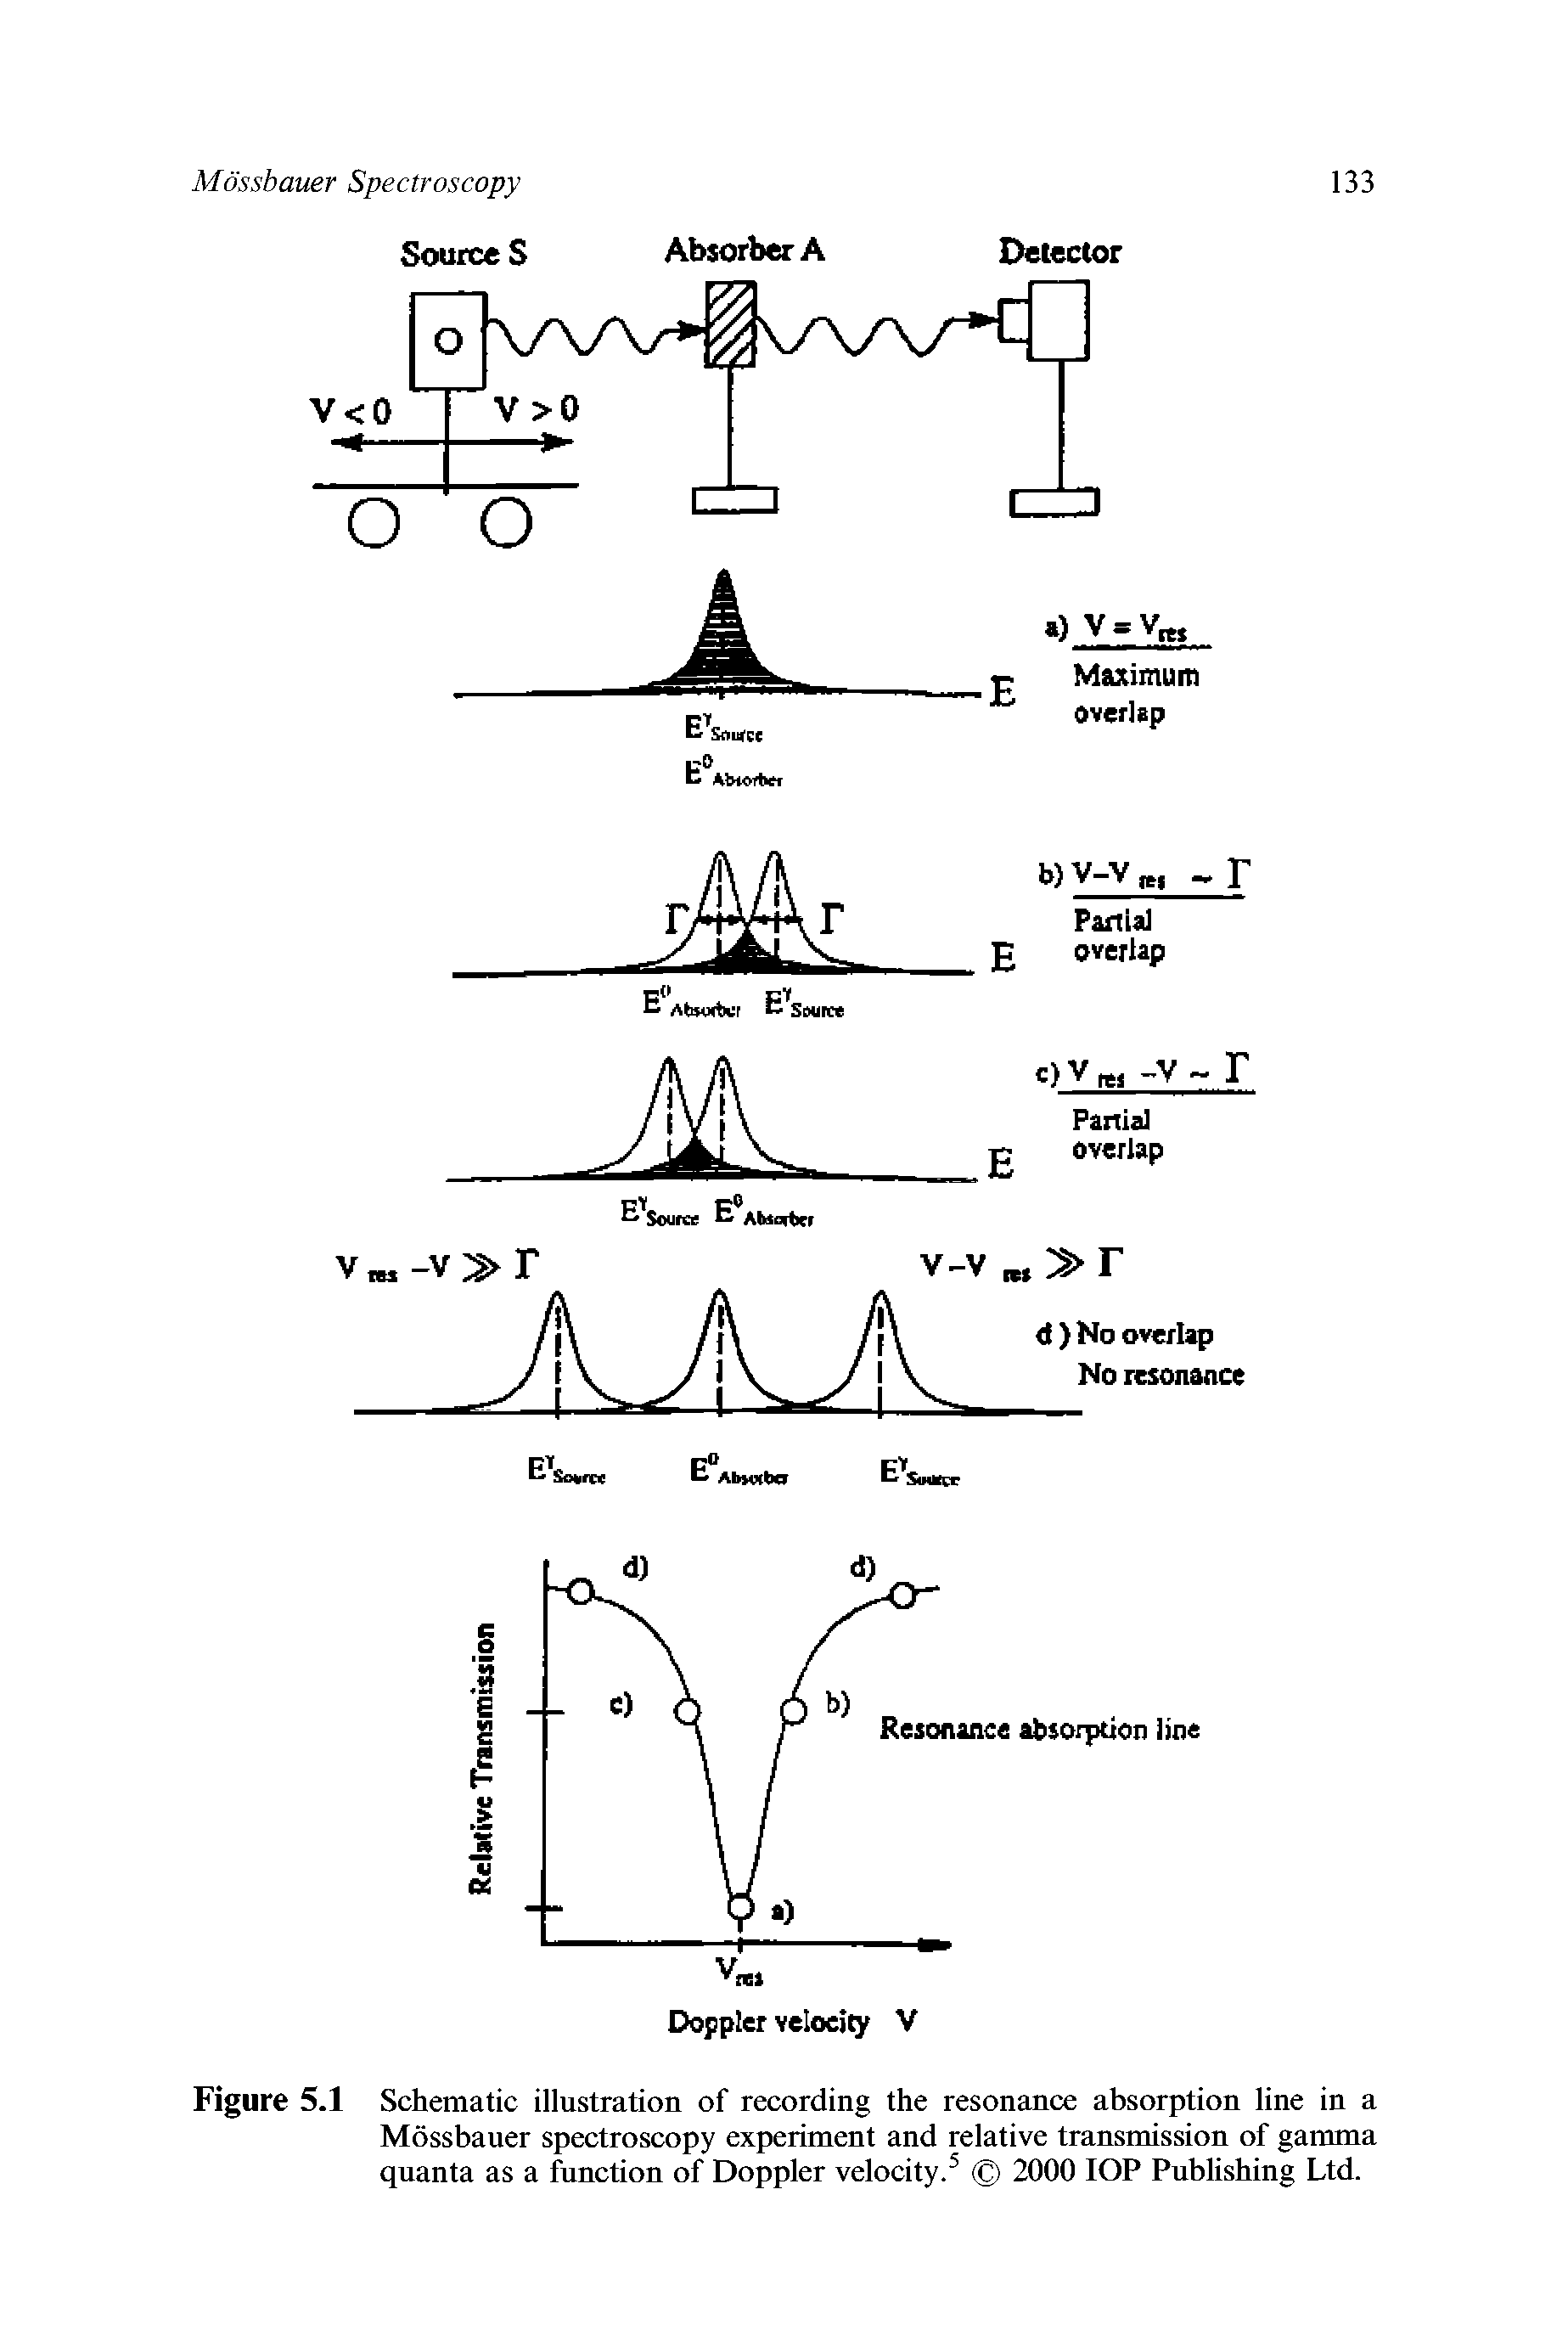 Figure 5.1 Schematic illustration of recording the resonance absorption line in a Mossbauer spectroscopy experiment and relative transmission of gamma quanta as a function of Doppler velocity. 2000 lOP Publishing Ltd.